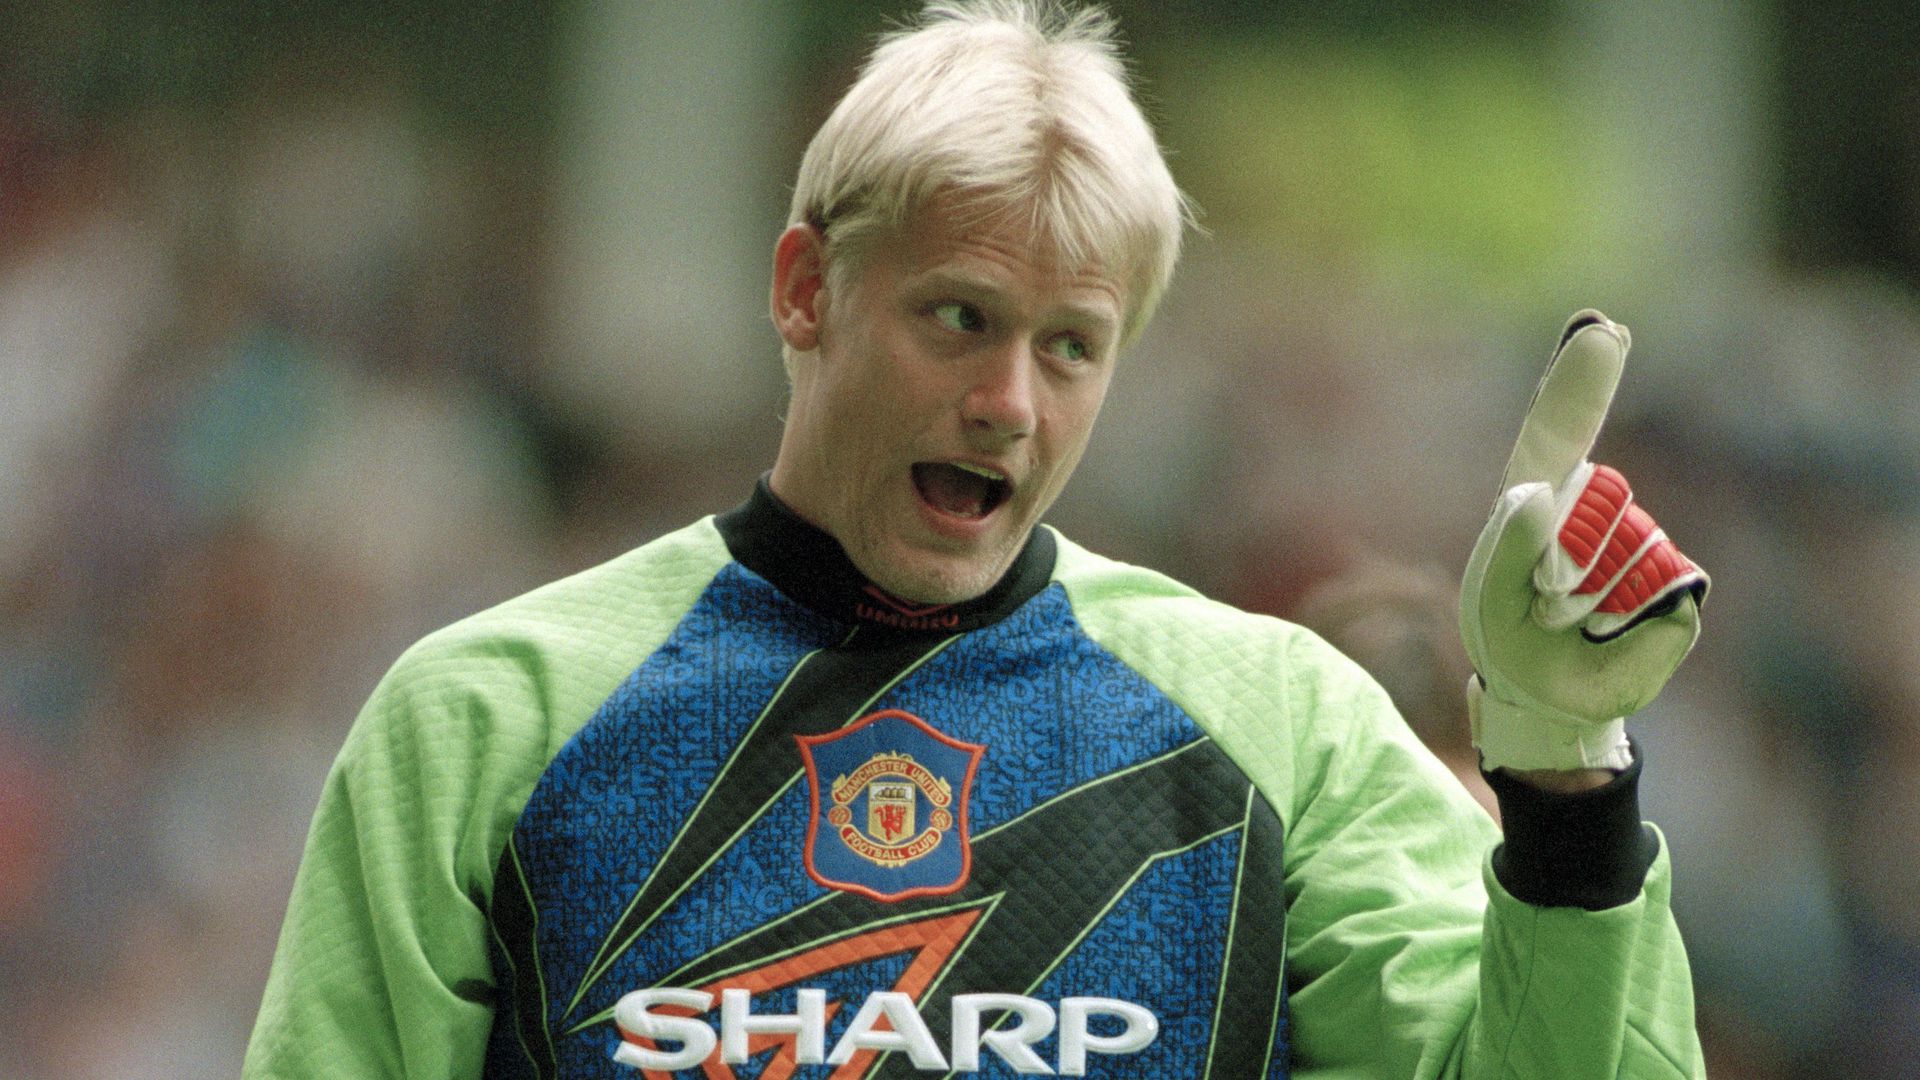 Manchester United retro home and goalkeeper shirt remakes 'leaked